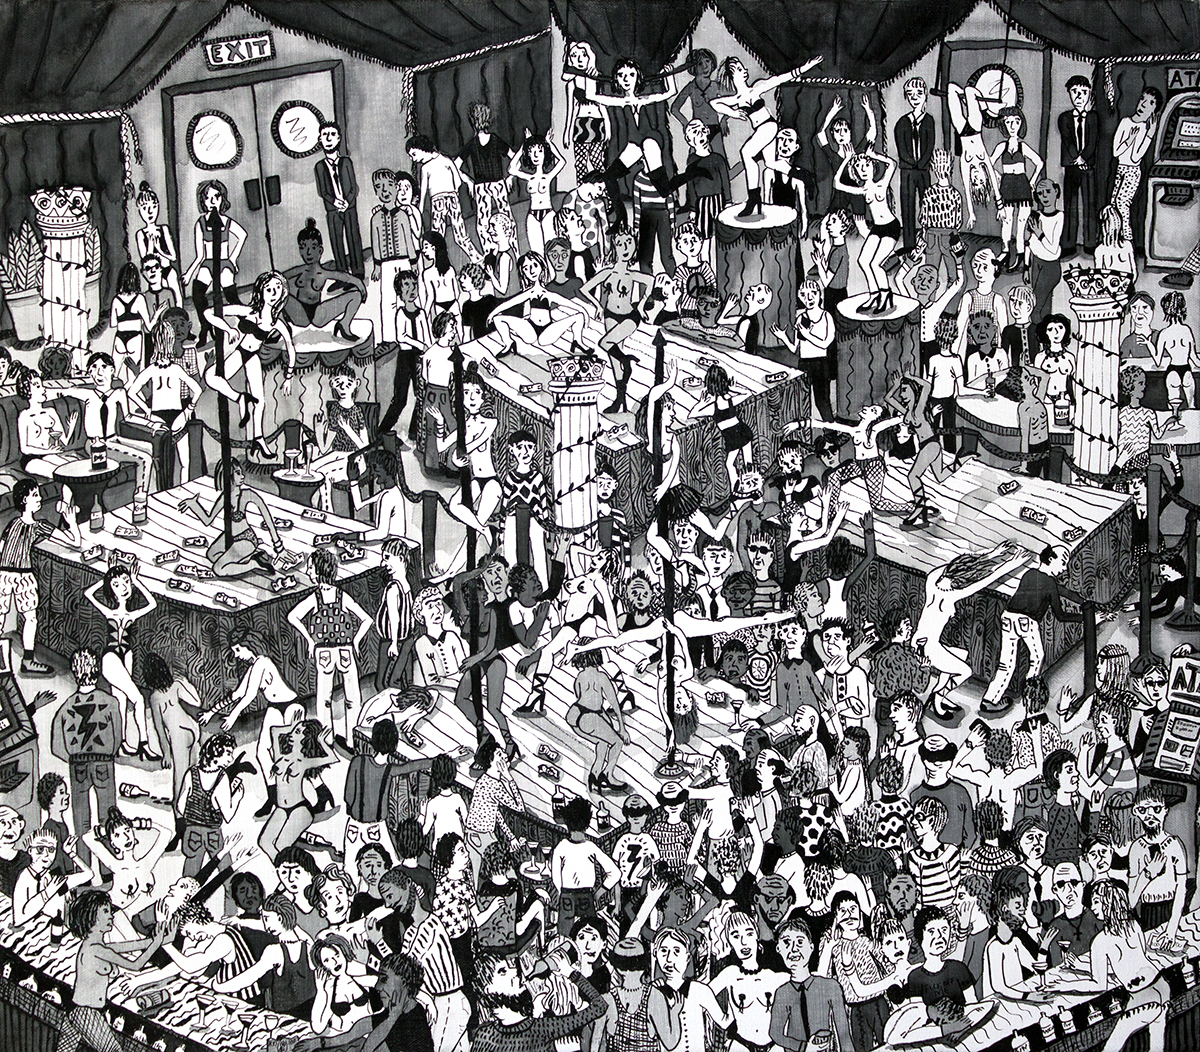  In the Club  ink on canvas  21”x24” 